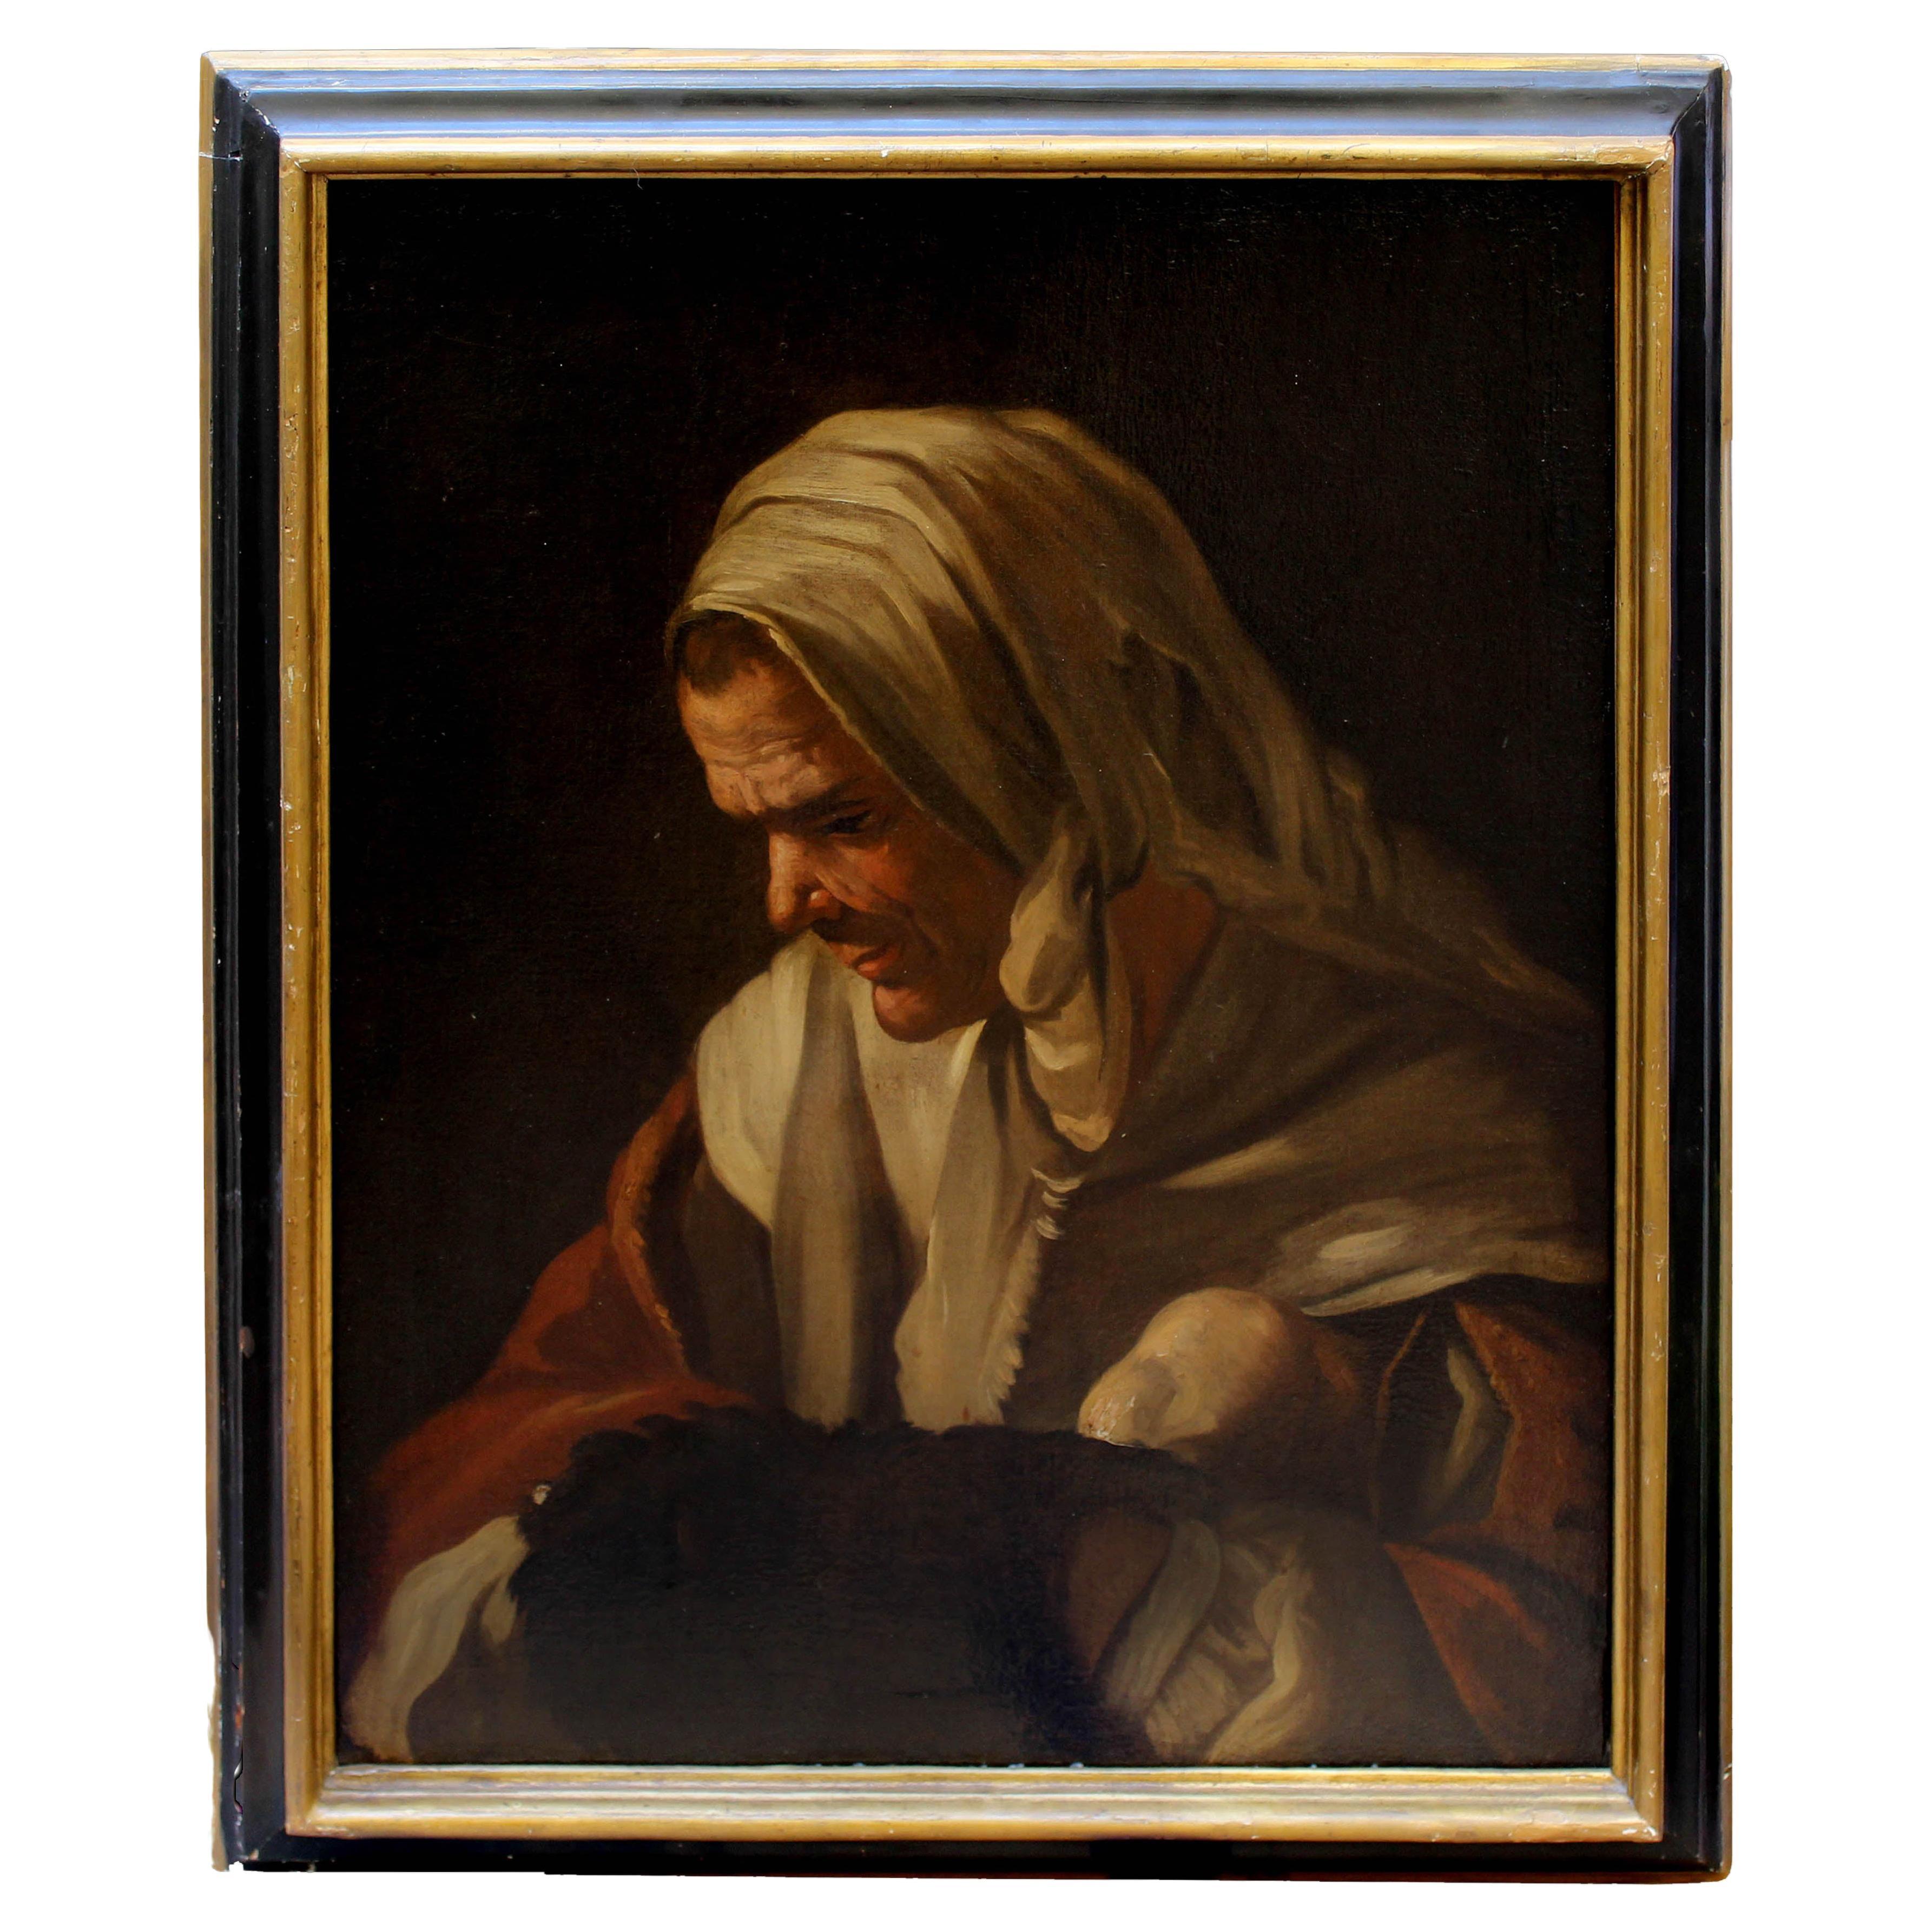 18th Century Portrait of Old Woman Painting in Oil on Canvas by Antonio Cifrondi